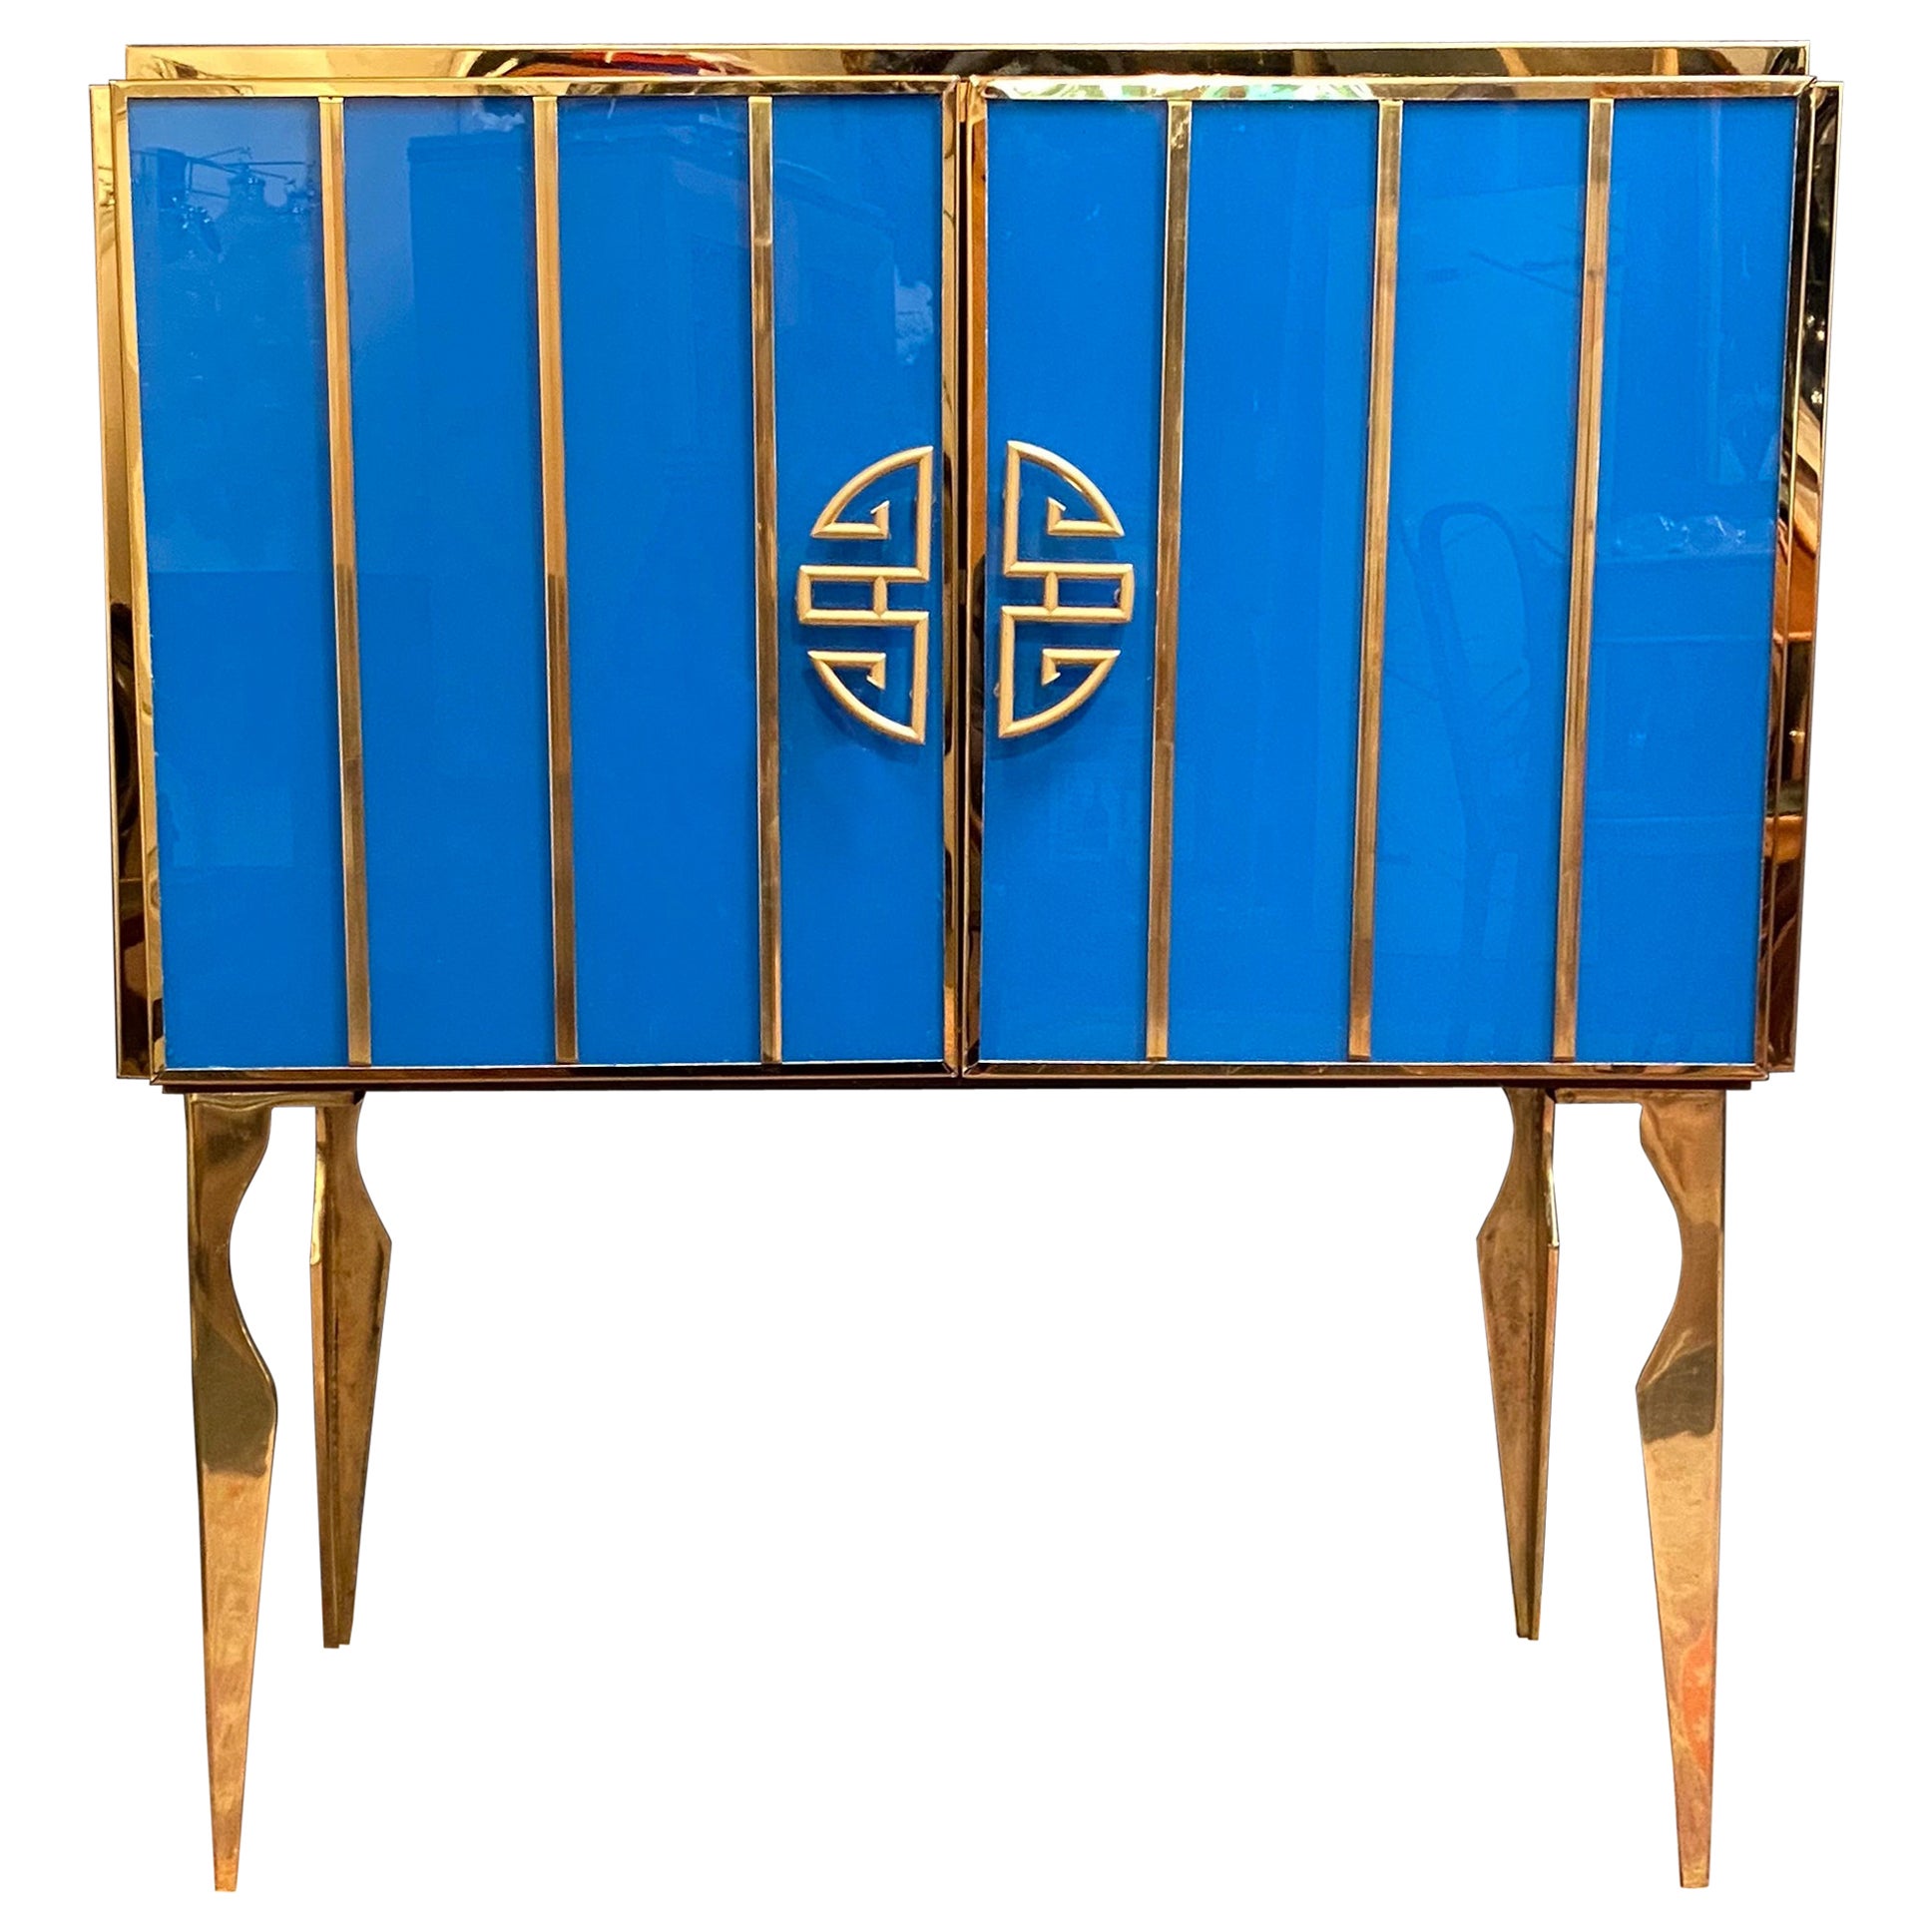 Very fine handmade bar cabinet by a master artisan. Brass frame with handmade and hand-cut cobalt blue and white opaline Murano glass raised on special brass legs.
Offered separately or as a pair. Listed price is for one item.